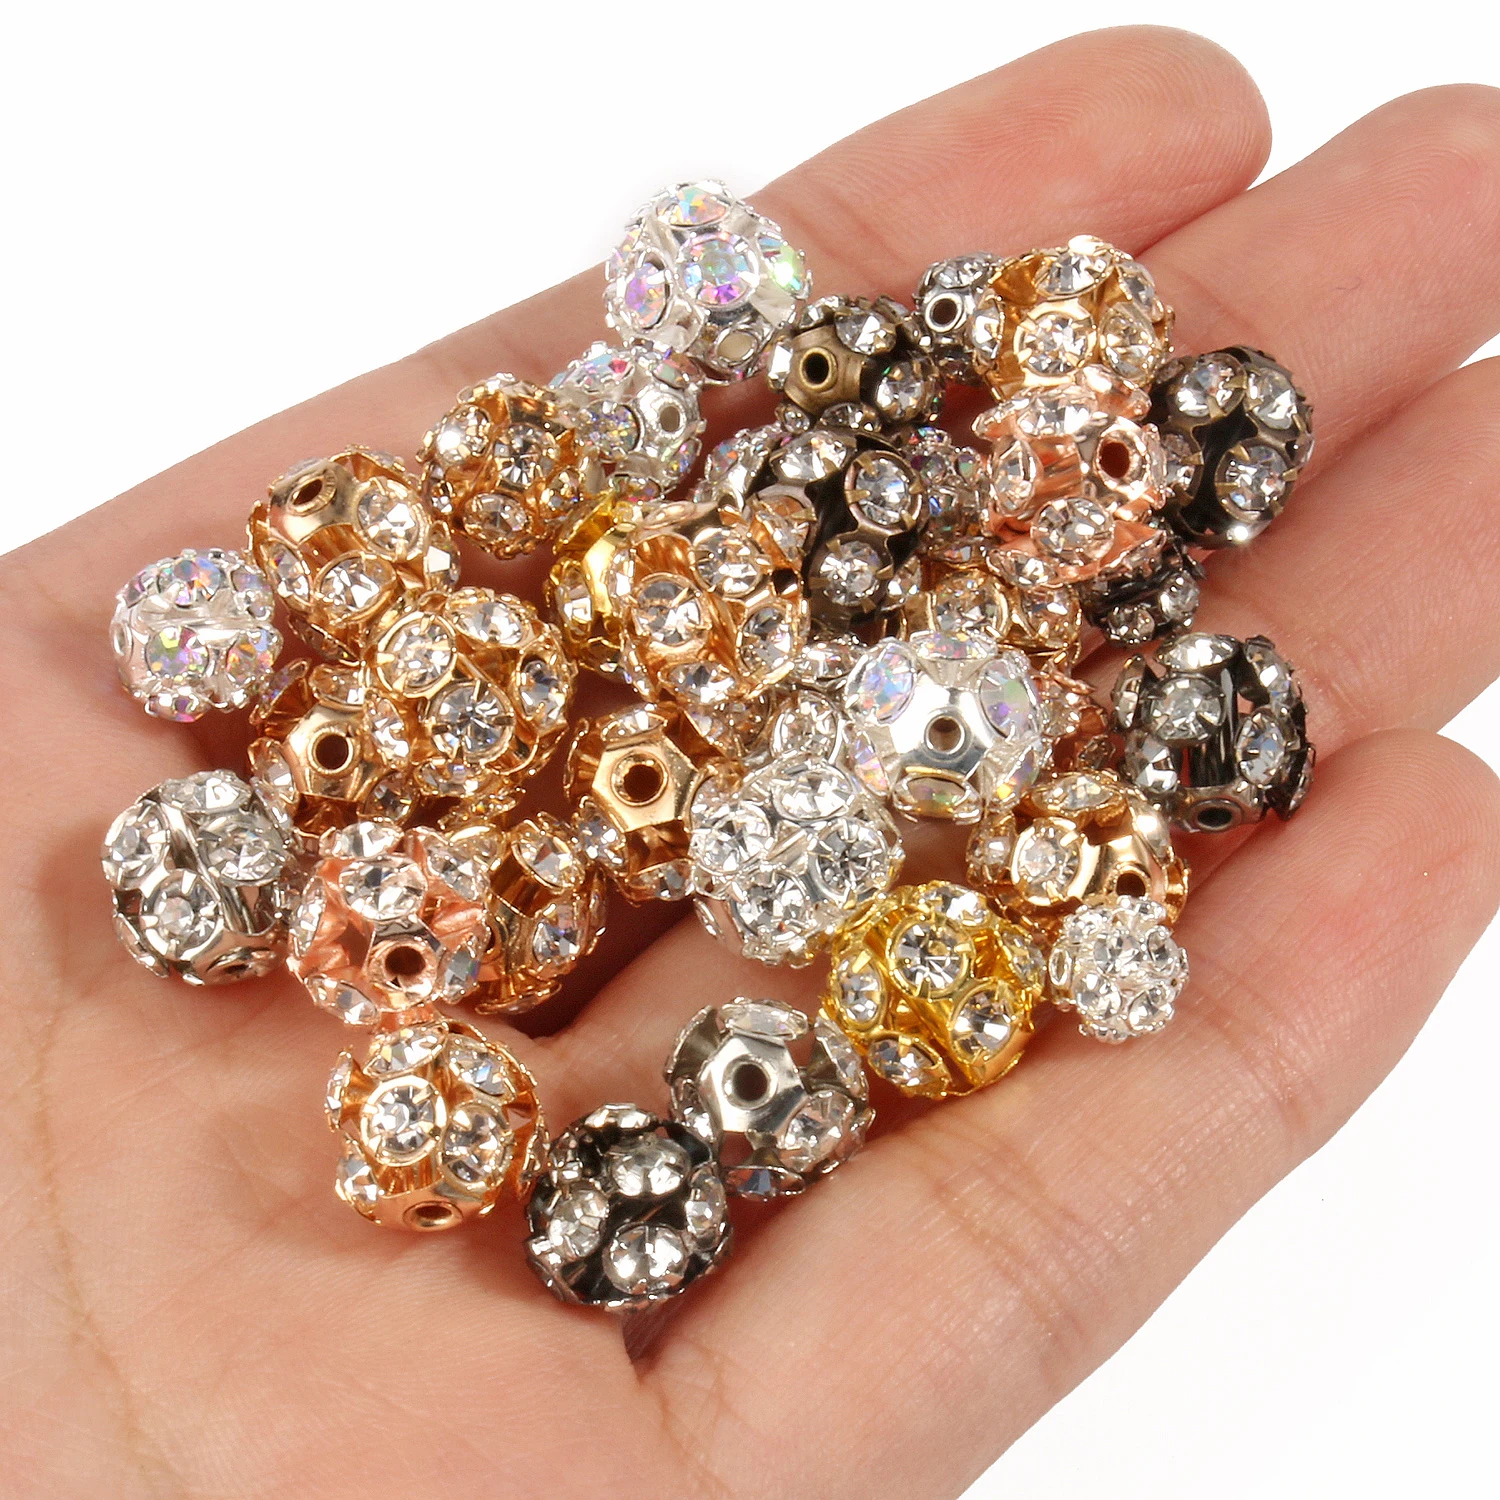 10pc/Lot 6mm 8mm 10mm AB Color Rhinestone Ball Shape Loose Beads Metal  Crystal Beads for Jewelry Making DIY Accessories